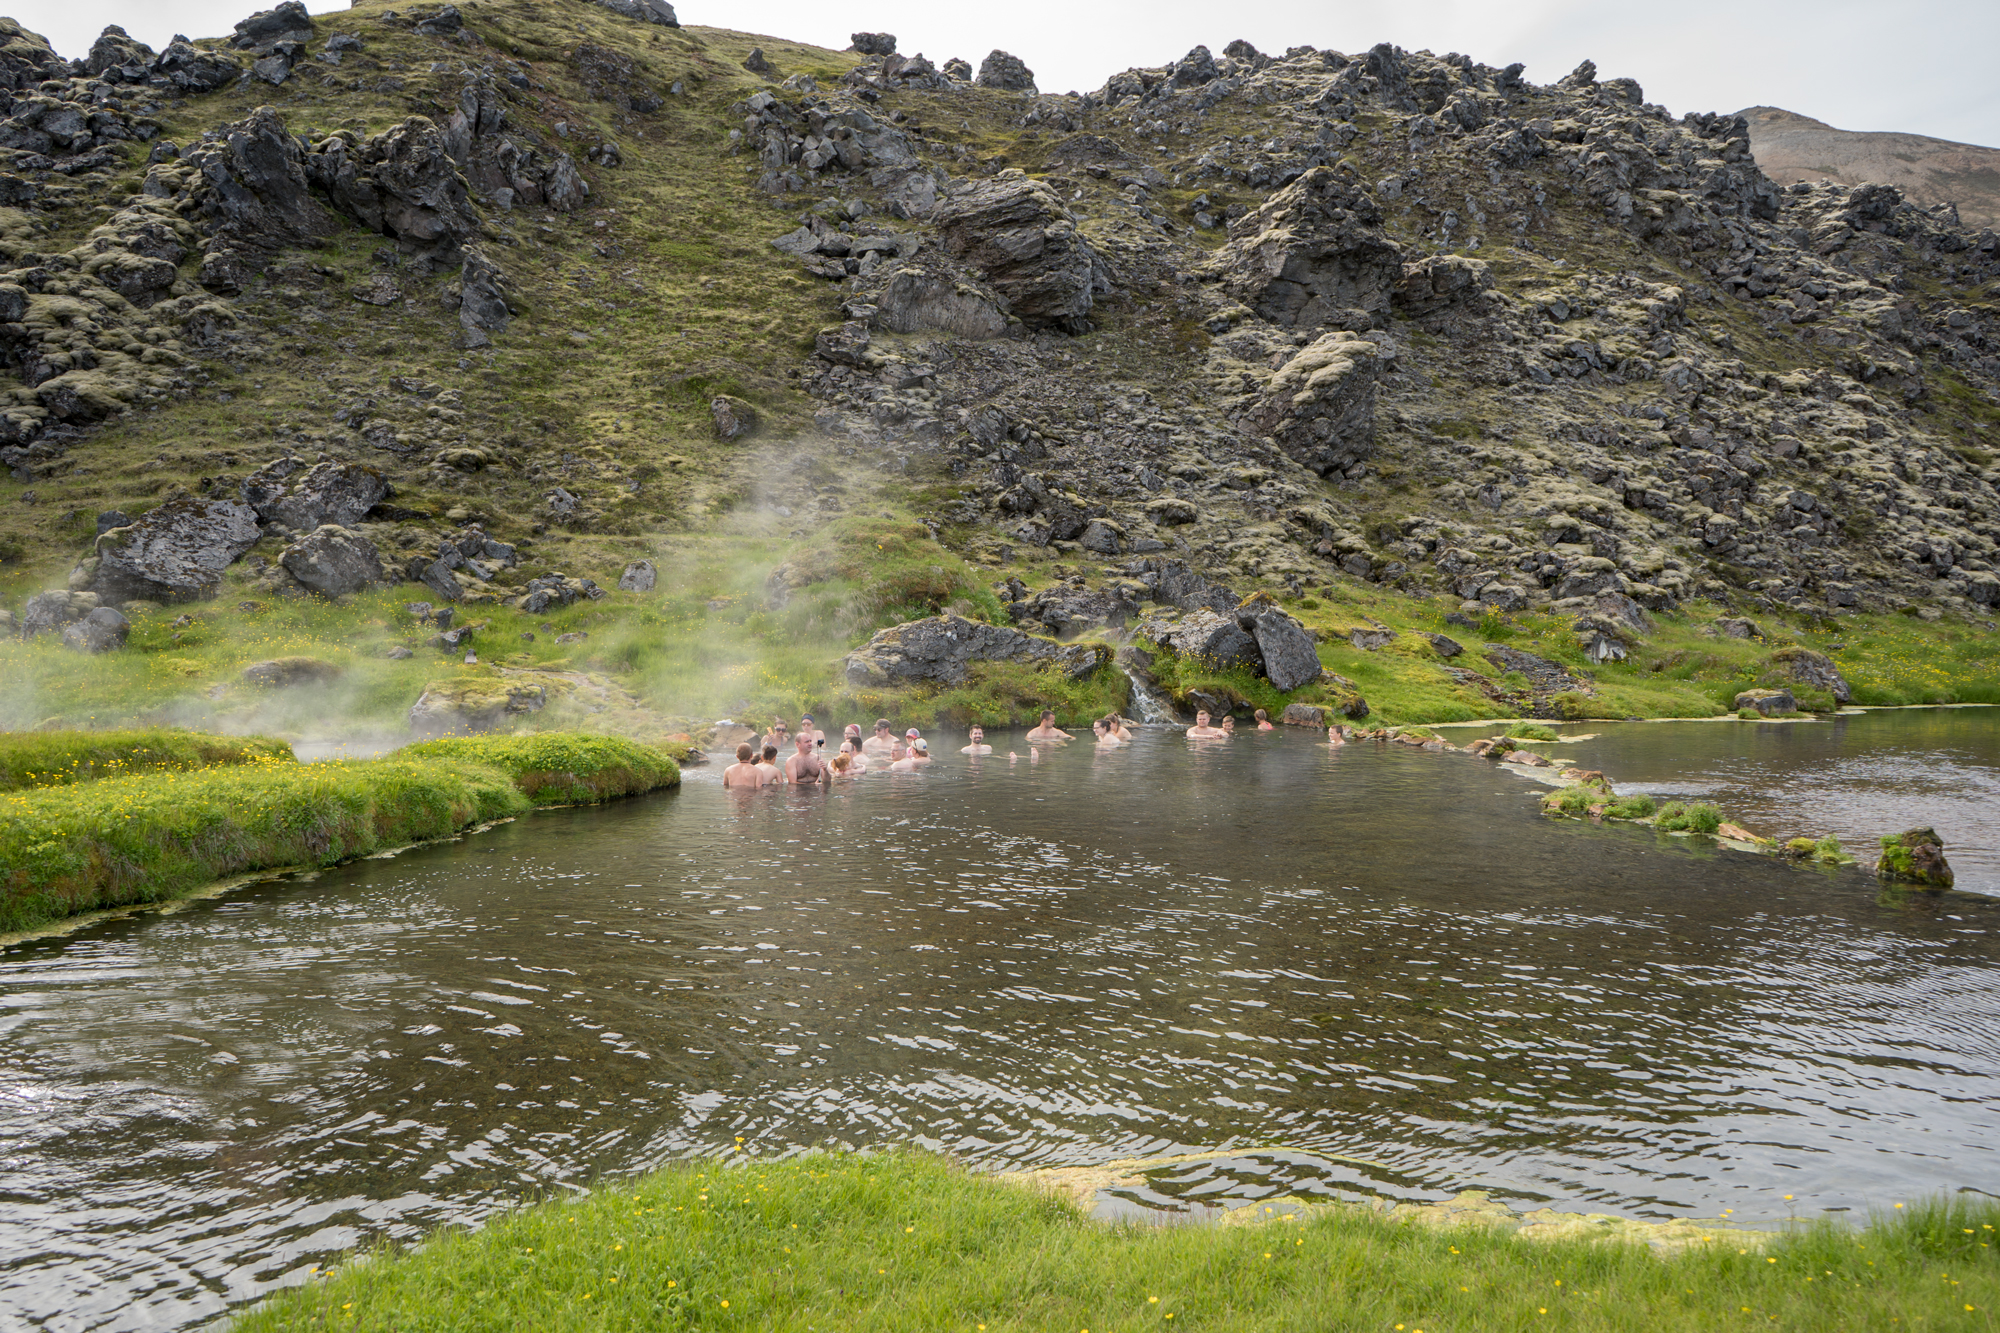 Bathing in a hot spring area in Landmannalaugar is a great way to spend a day.